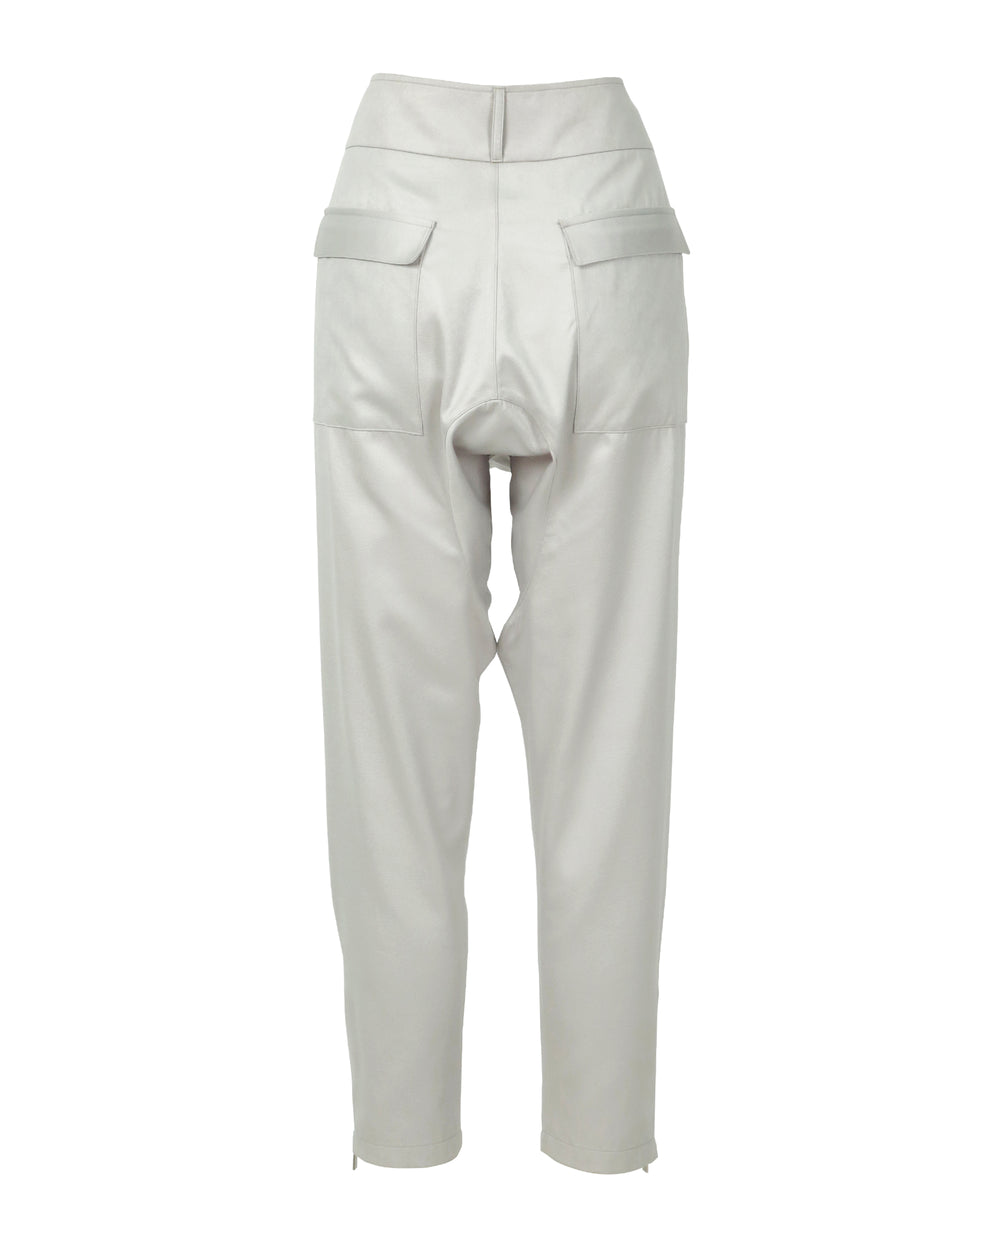 High-Rise Light Grey Tapered Ankle Lounge Pants - back